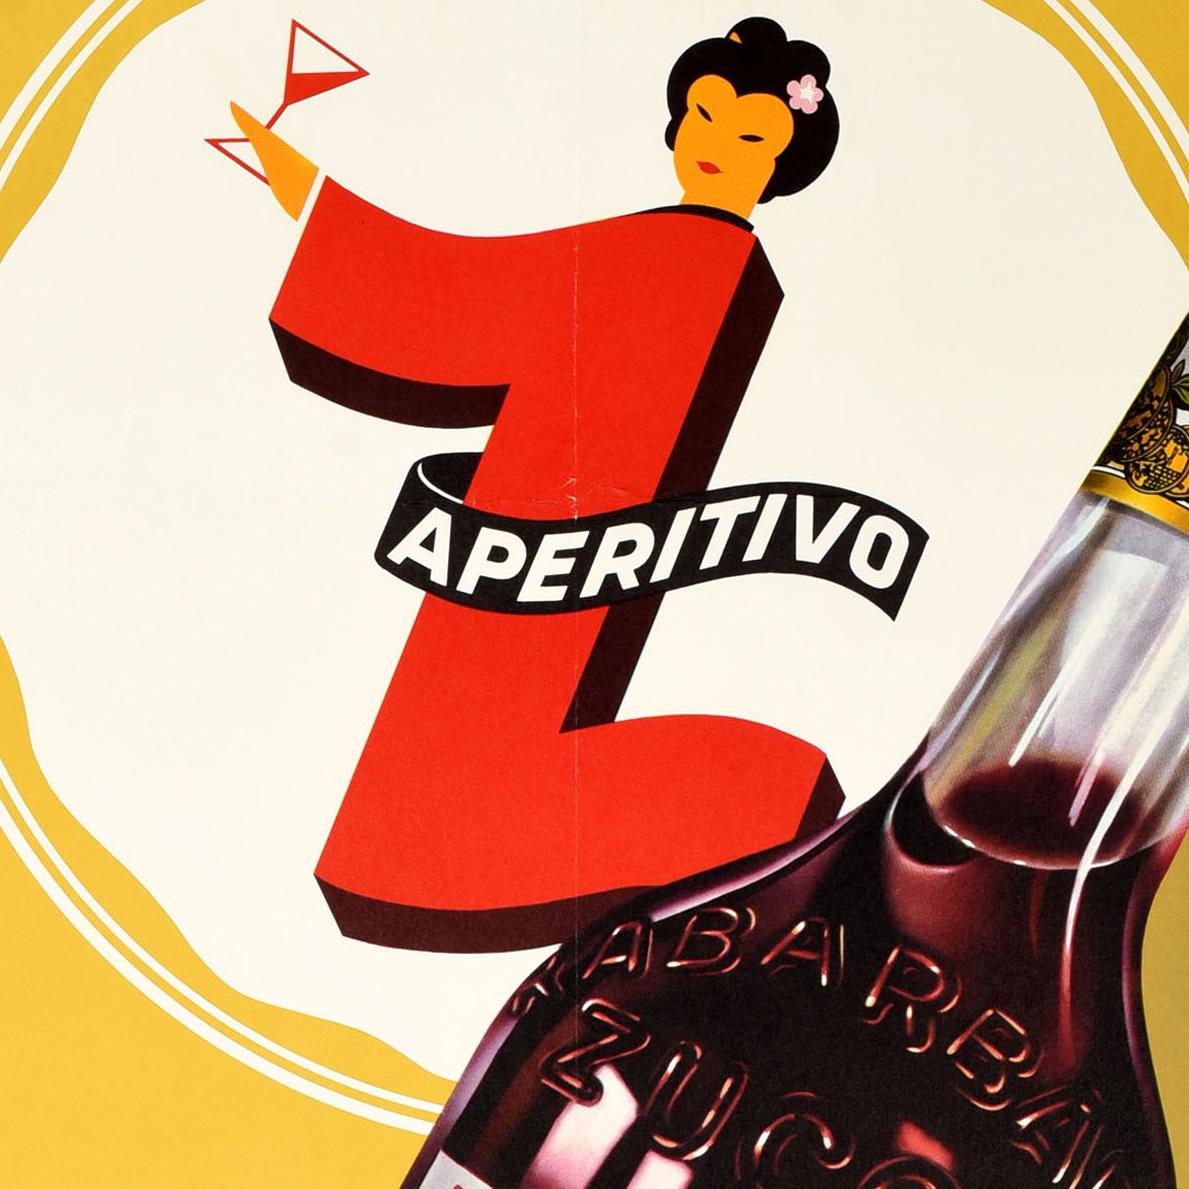 Original vintage Swiss poster for Rabarbaro Zucca Aperitif. Great image featuring an illustration of a bottle of the Italian aperitif drink infused with Chinese rhubarb root and other botanical herbs and spice, a graphic design depiction of an Asian